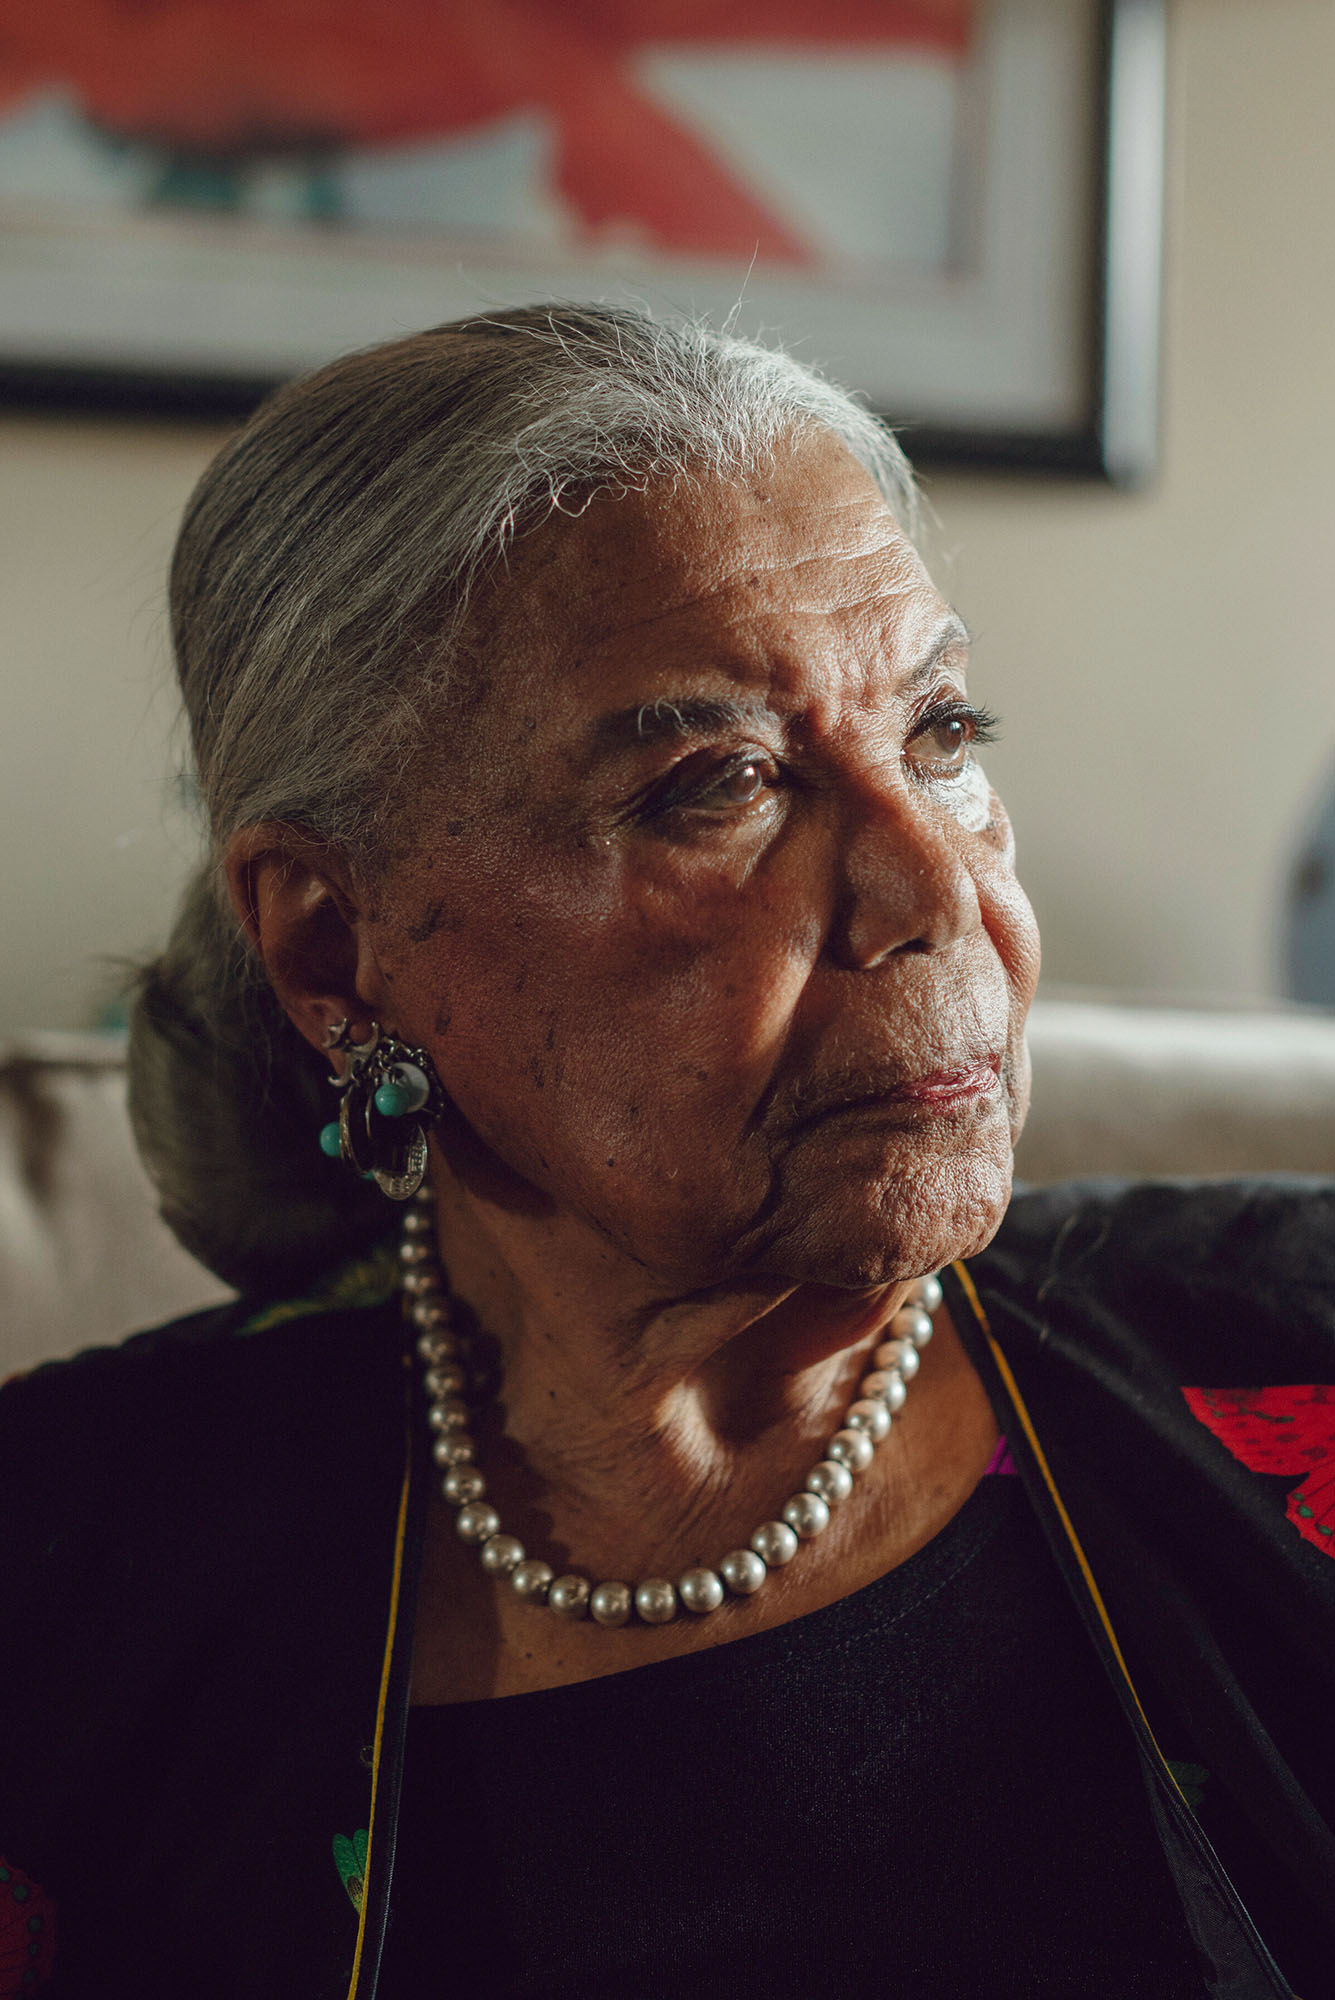 Photo: A portrait shot of Virginia Allen, an older Black woman with her gray hair pulled back into a bun. She wears a Black top and pearls.